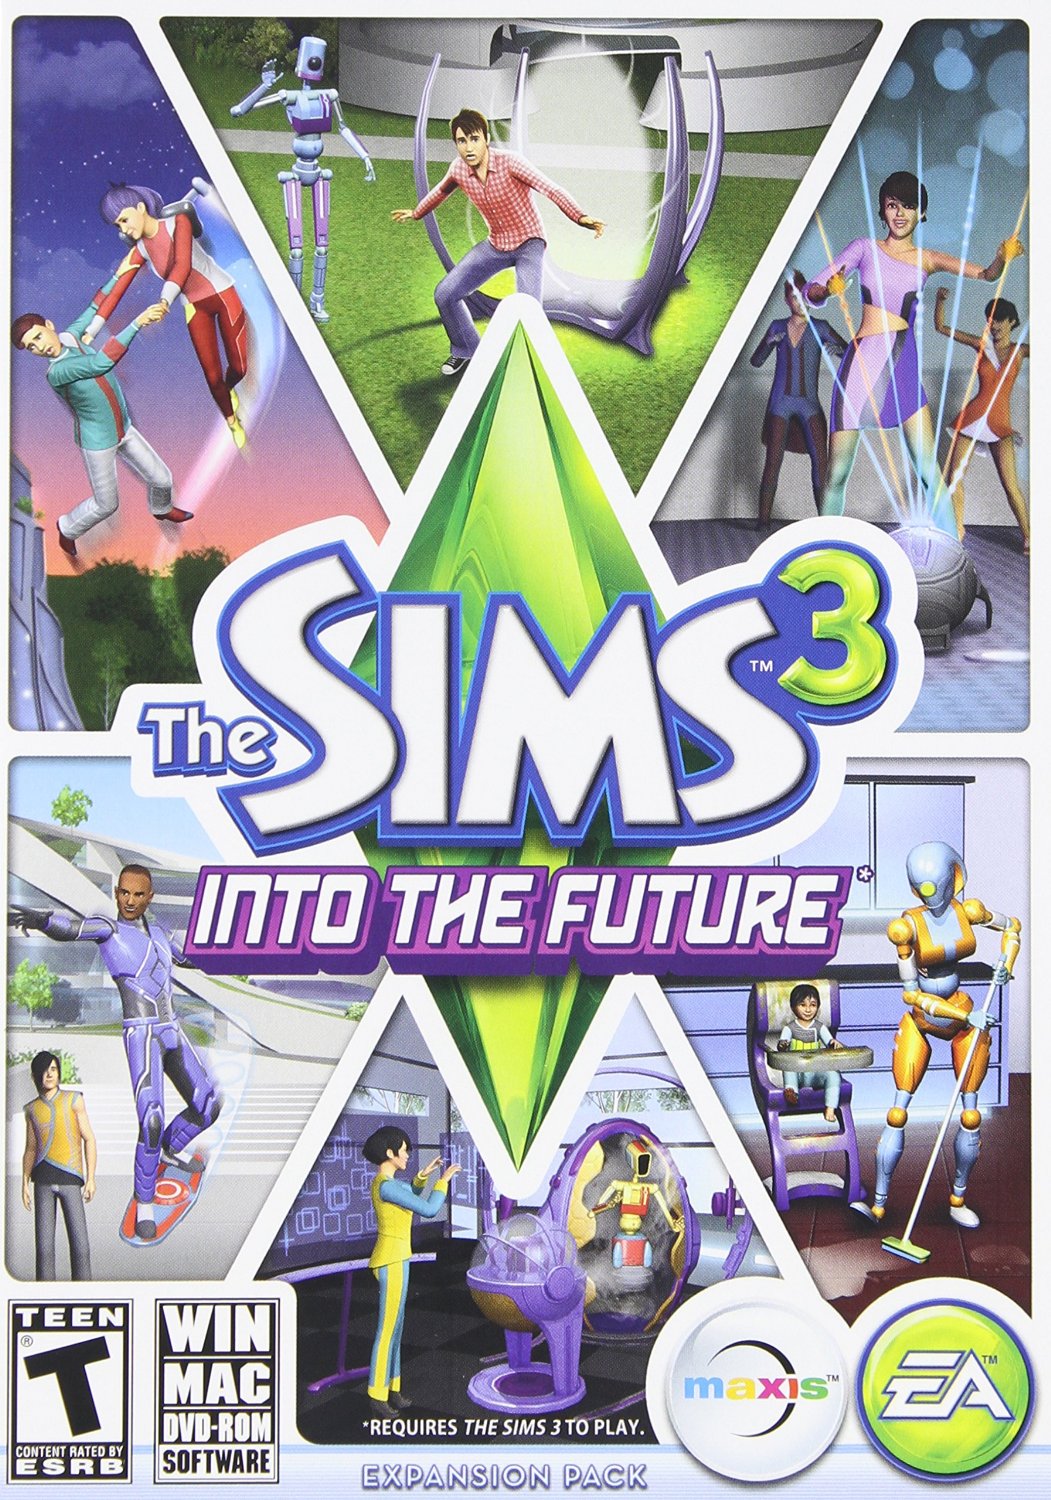 Ea The Sims 3 Into The Future - Simulation Game Retail - Dvd-rom - Mac, Pc (73089) - image 5 of 5